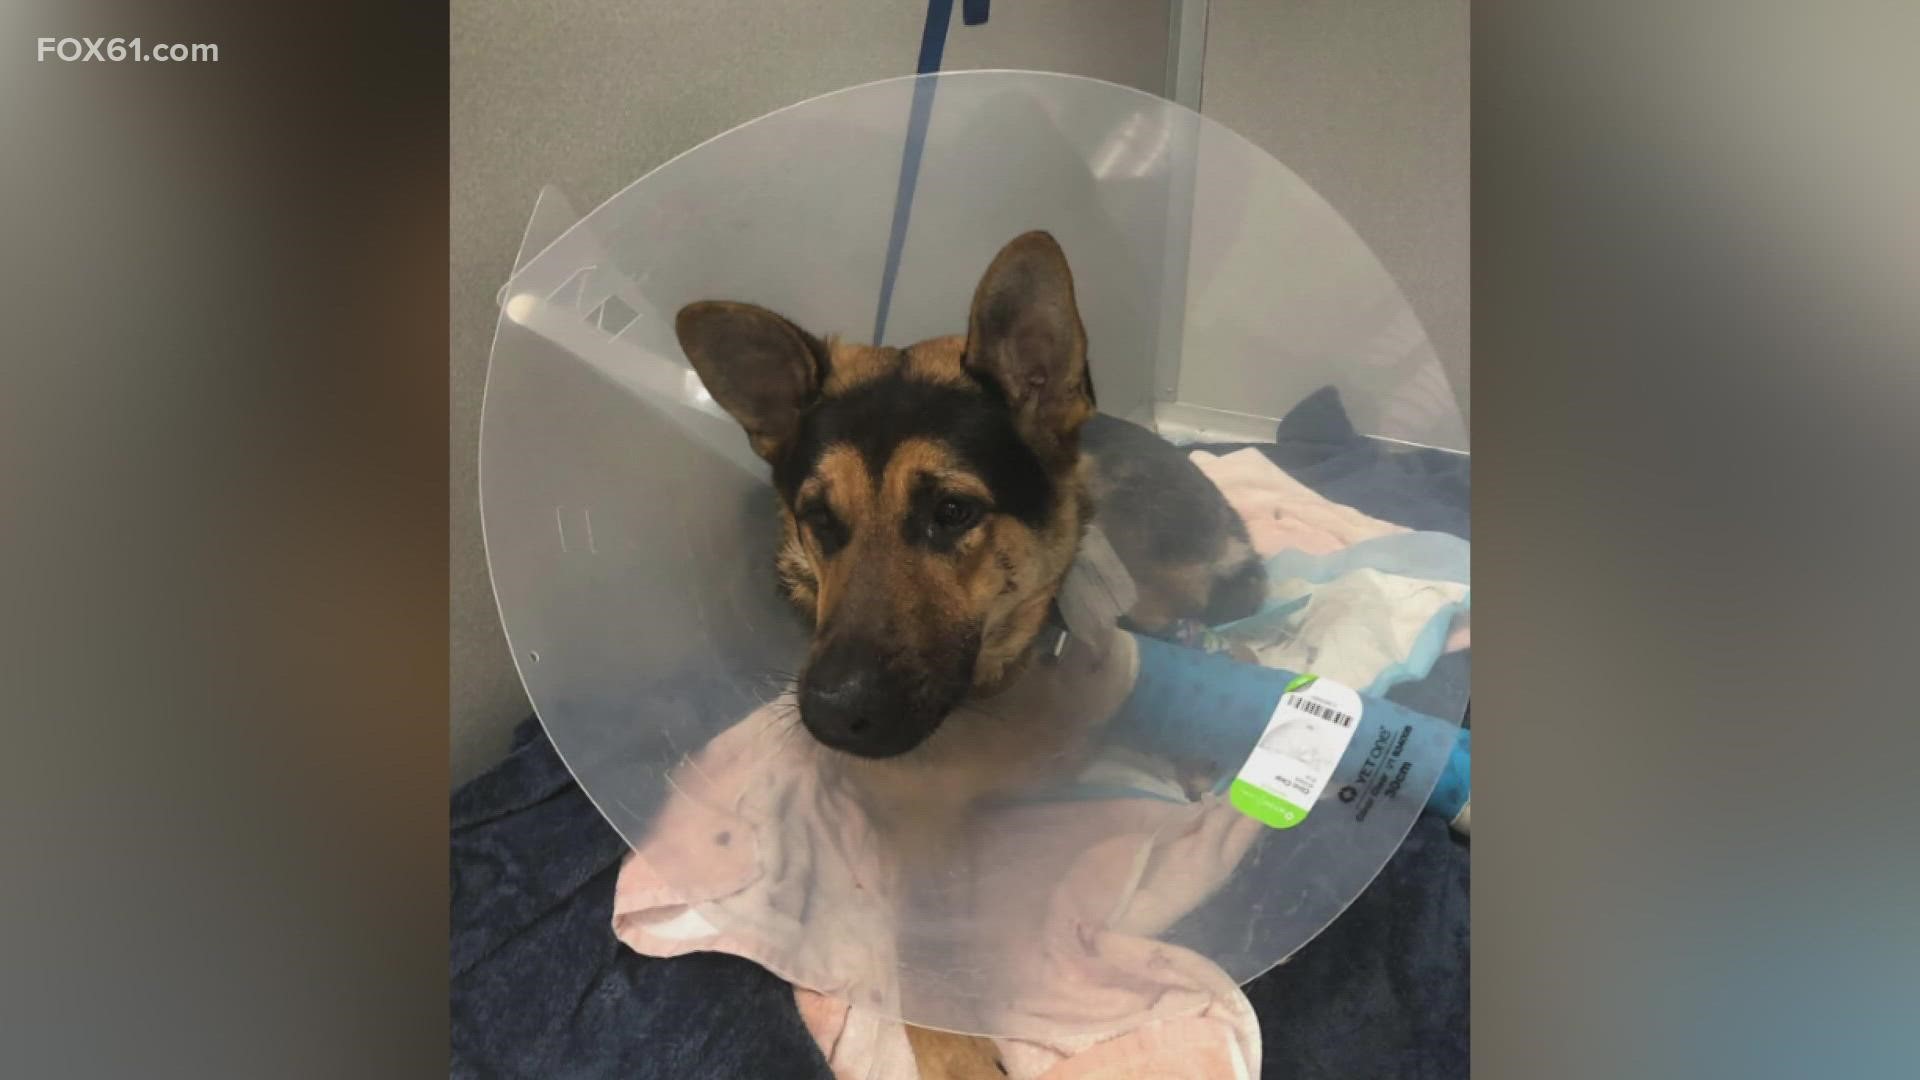 The two year old German Shepard, named "Thunda," continues to recover at an animal hospital in Shelton, after having his front left leg amputated